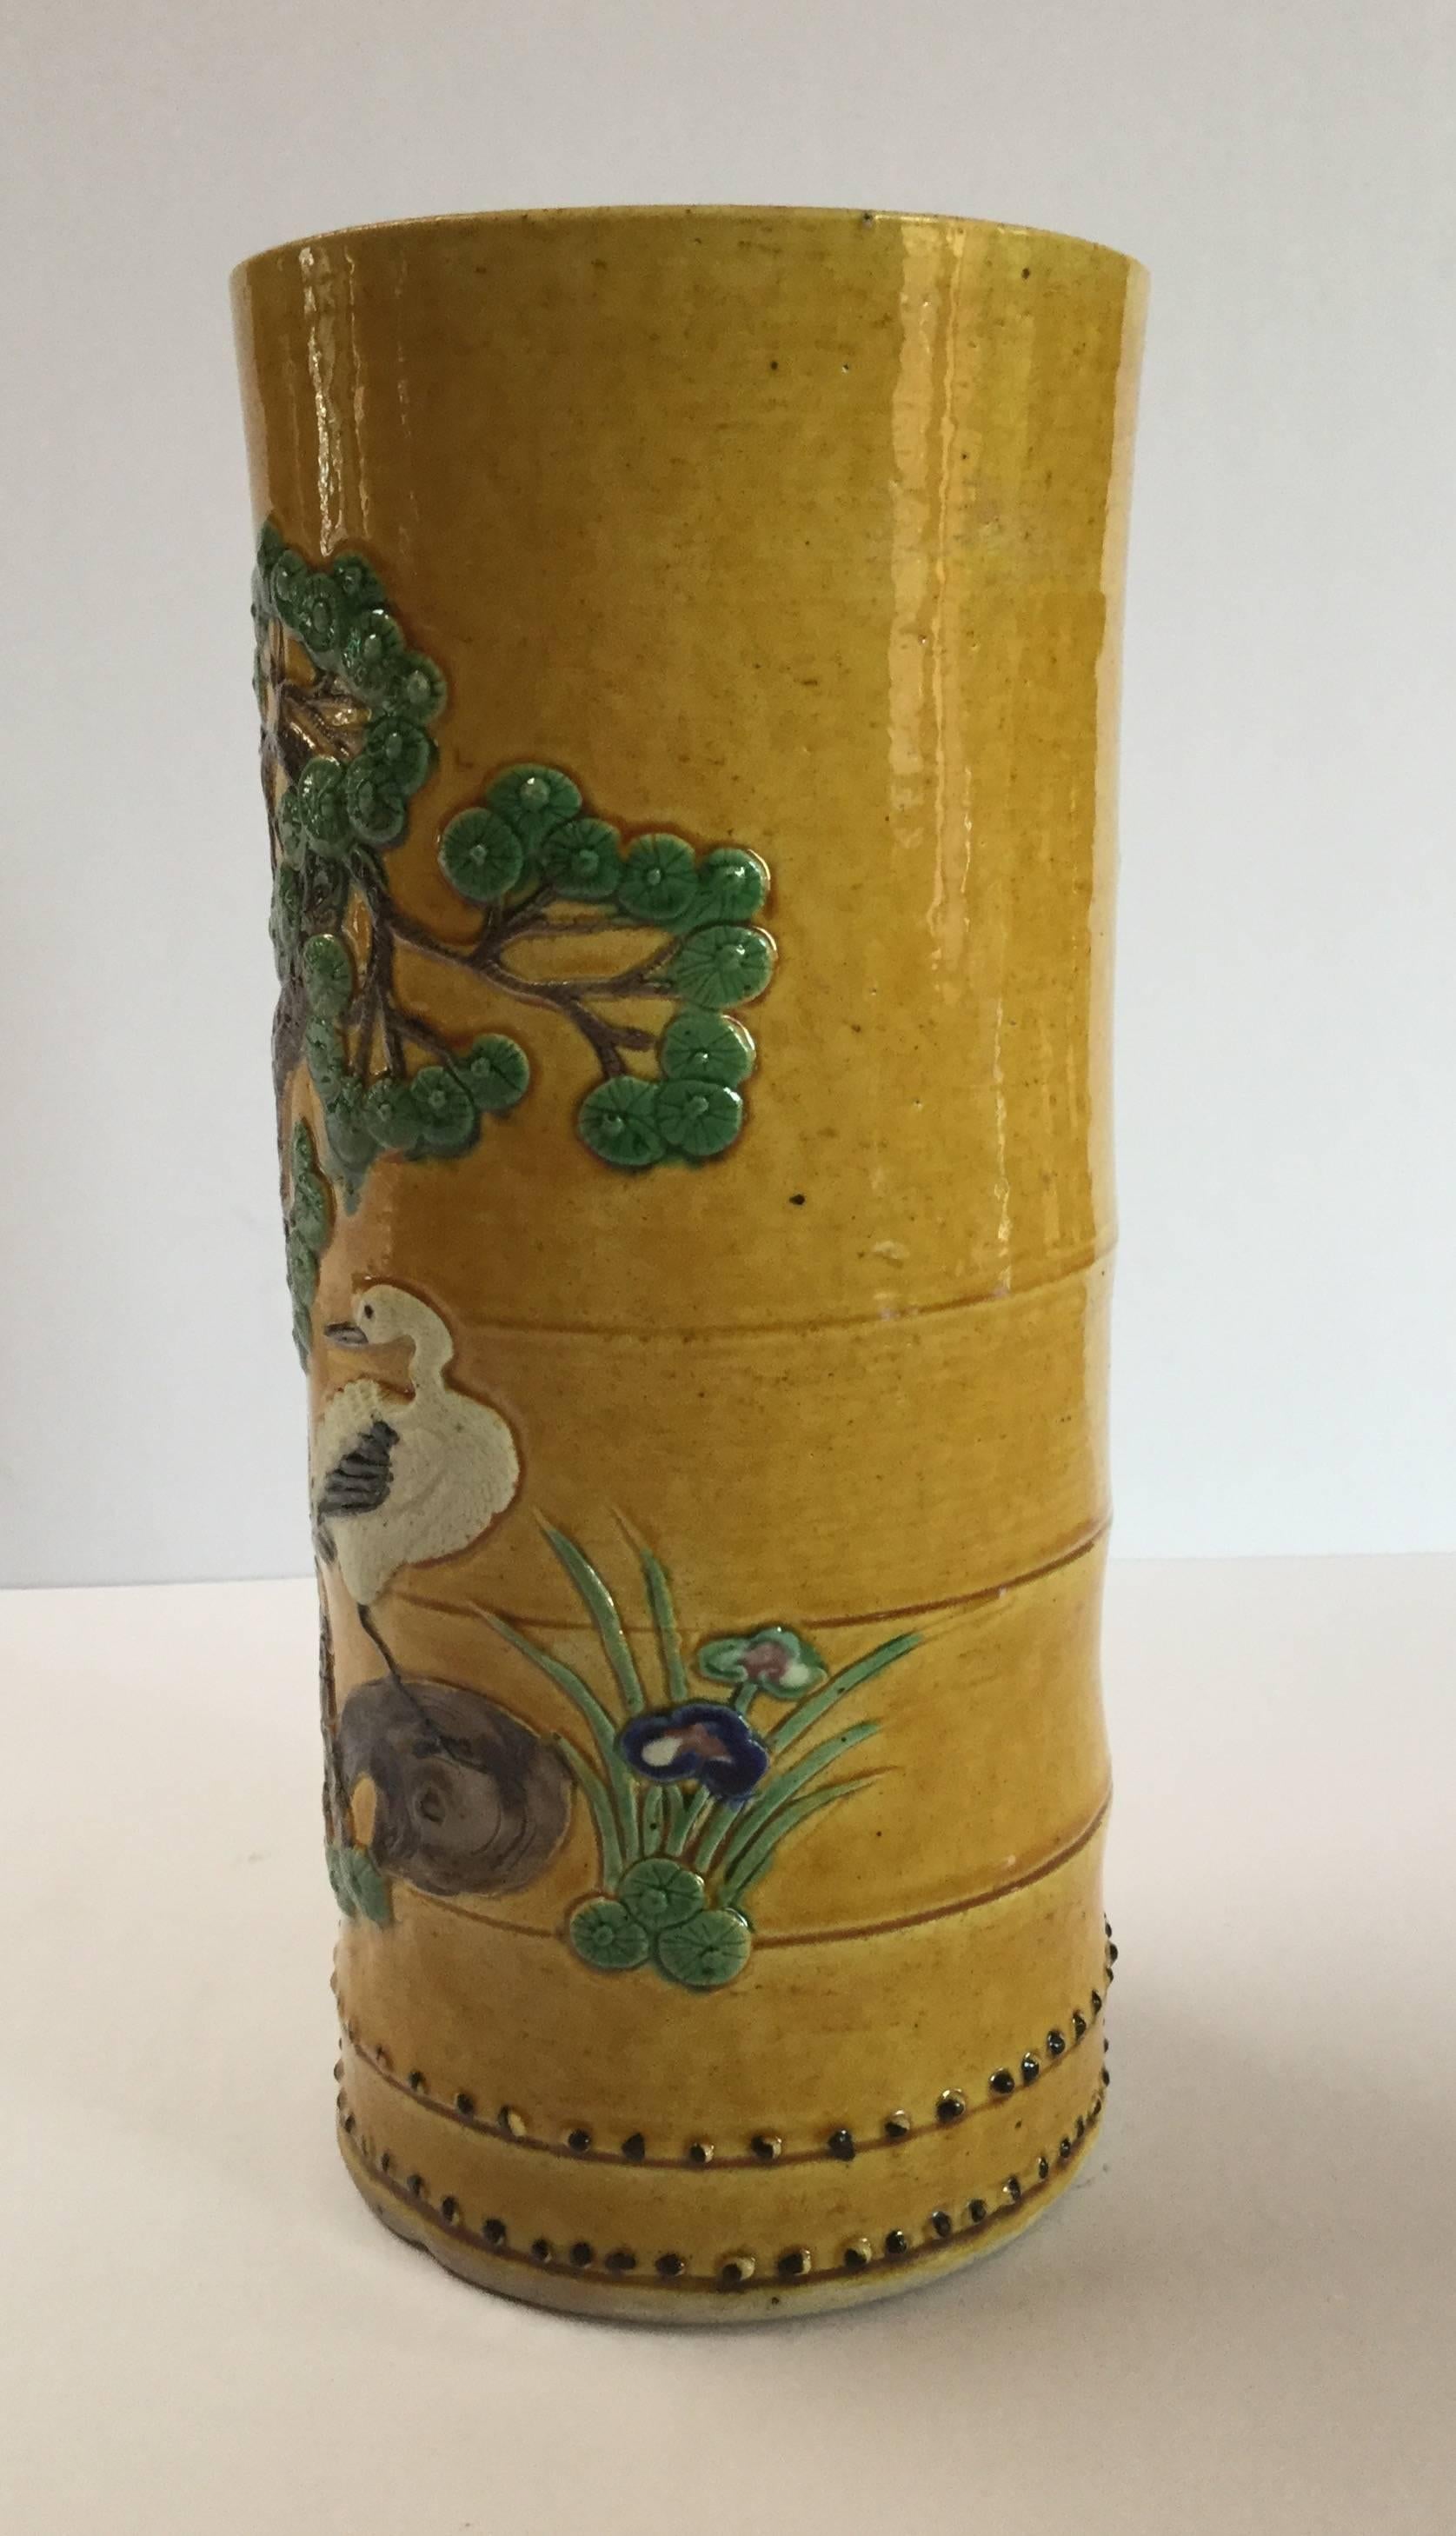 A beautiful cylindrical shaped ceramic arrow vase of ochre yellow with green, white and brown glazes depicting a twisted pine tree, spotted deer and cranes. This piece is from a private collection in Santa Fe, NM.